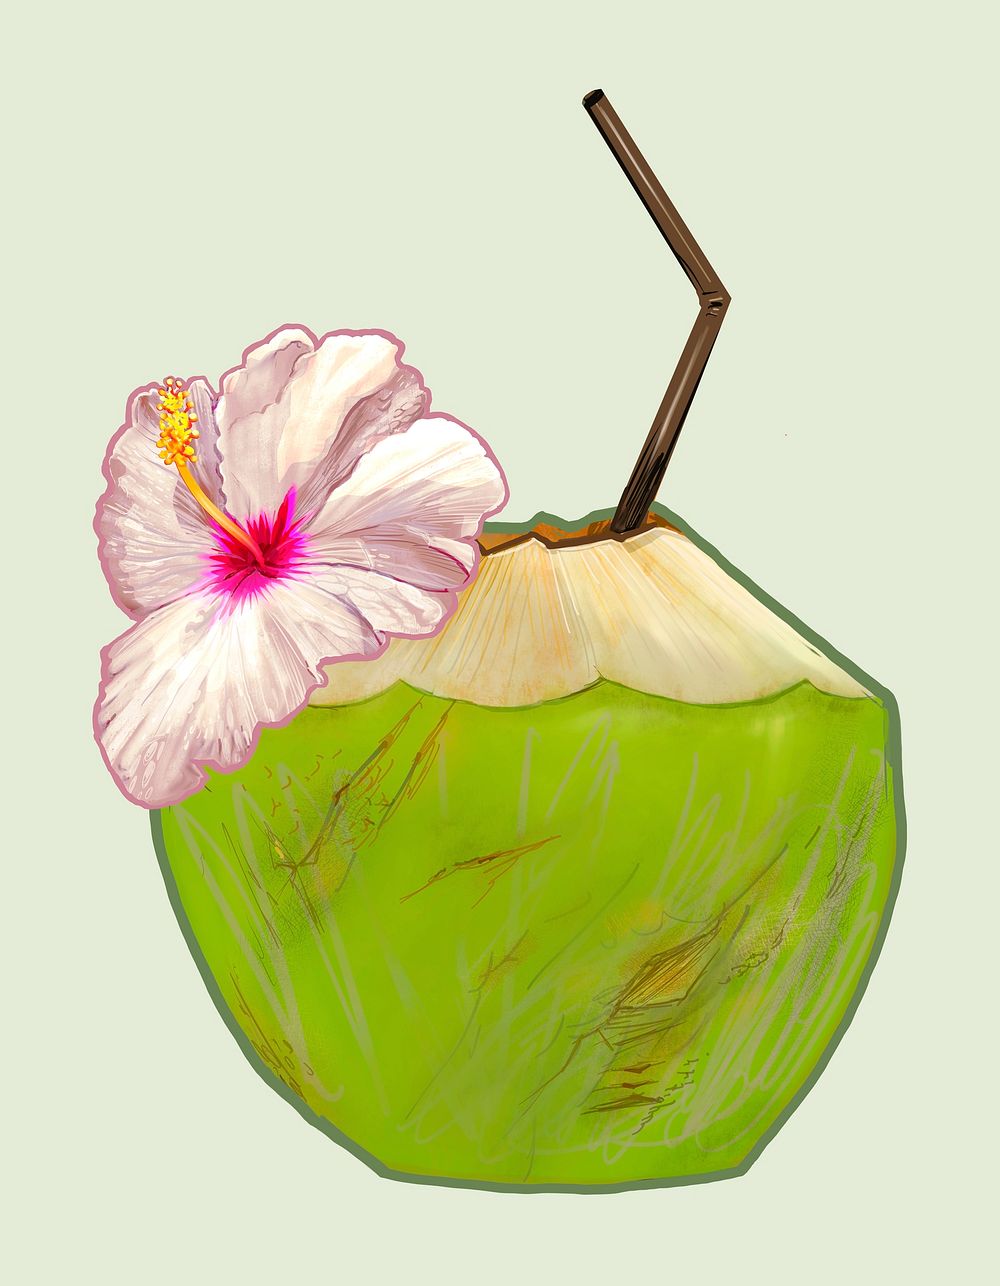 Tropical fresh young coconut illustration